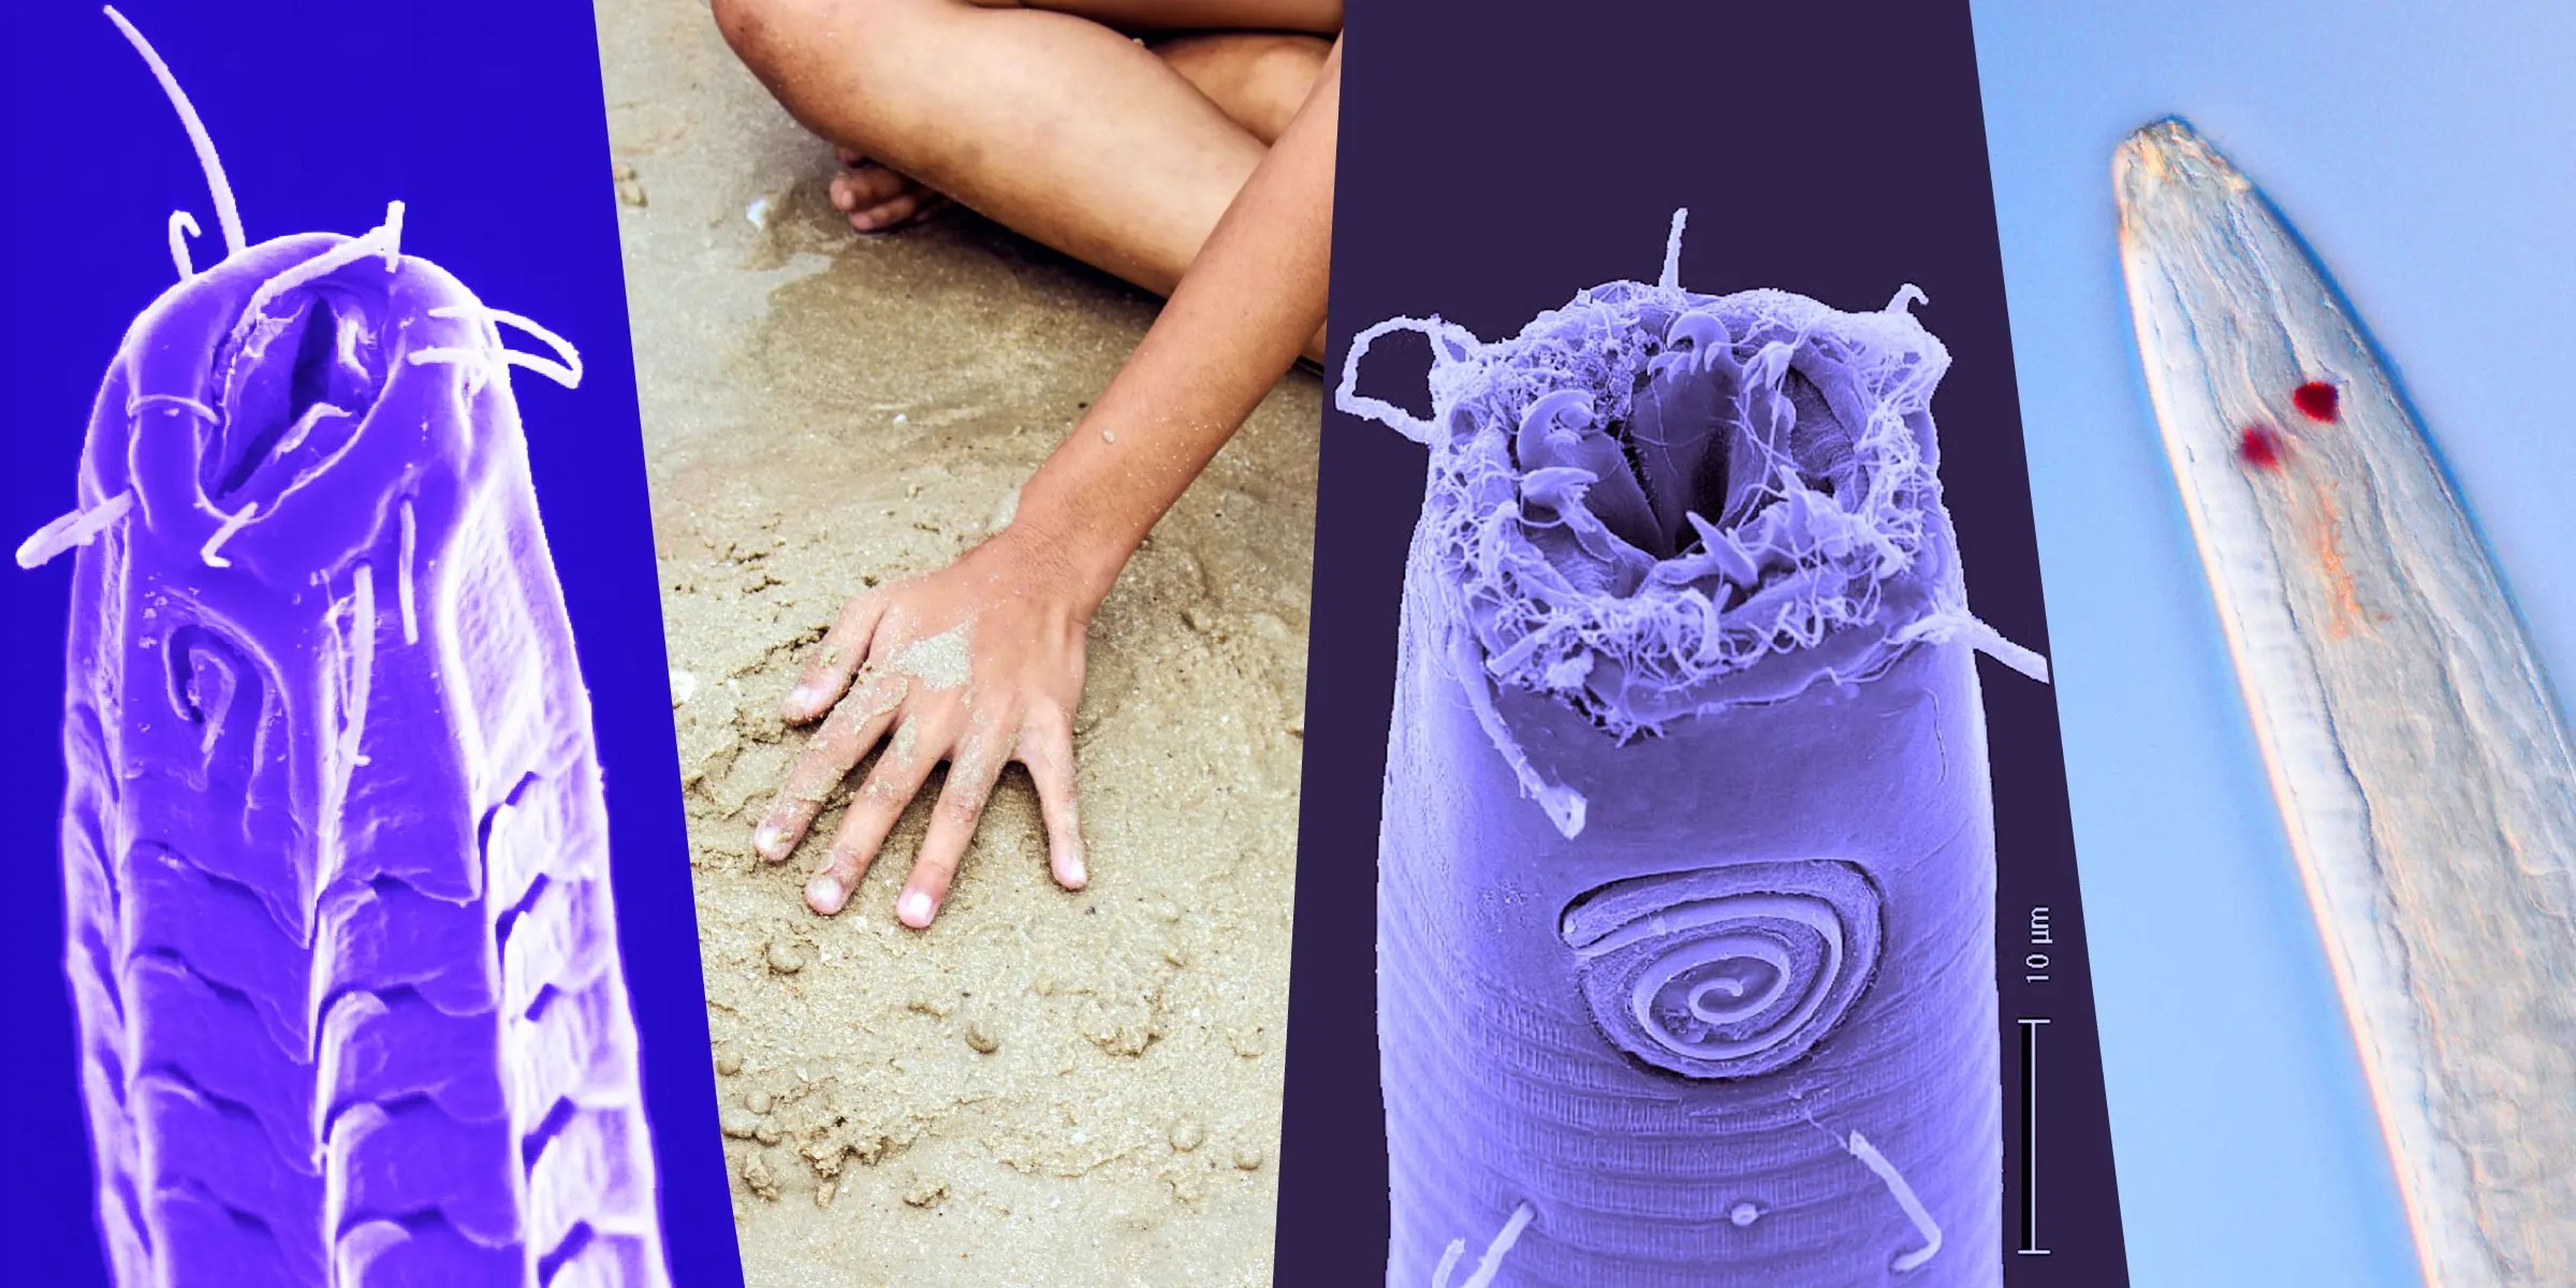 photo composite of three microscopic images of worms and an image of someone sitting with their hand in the sand